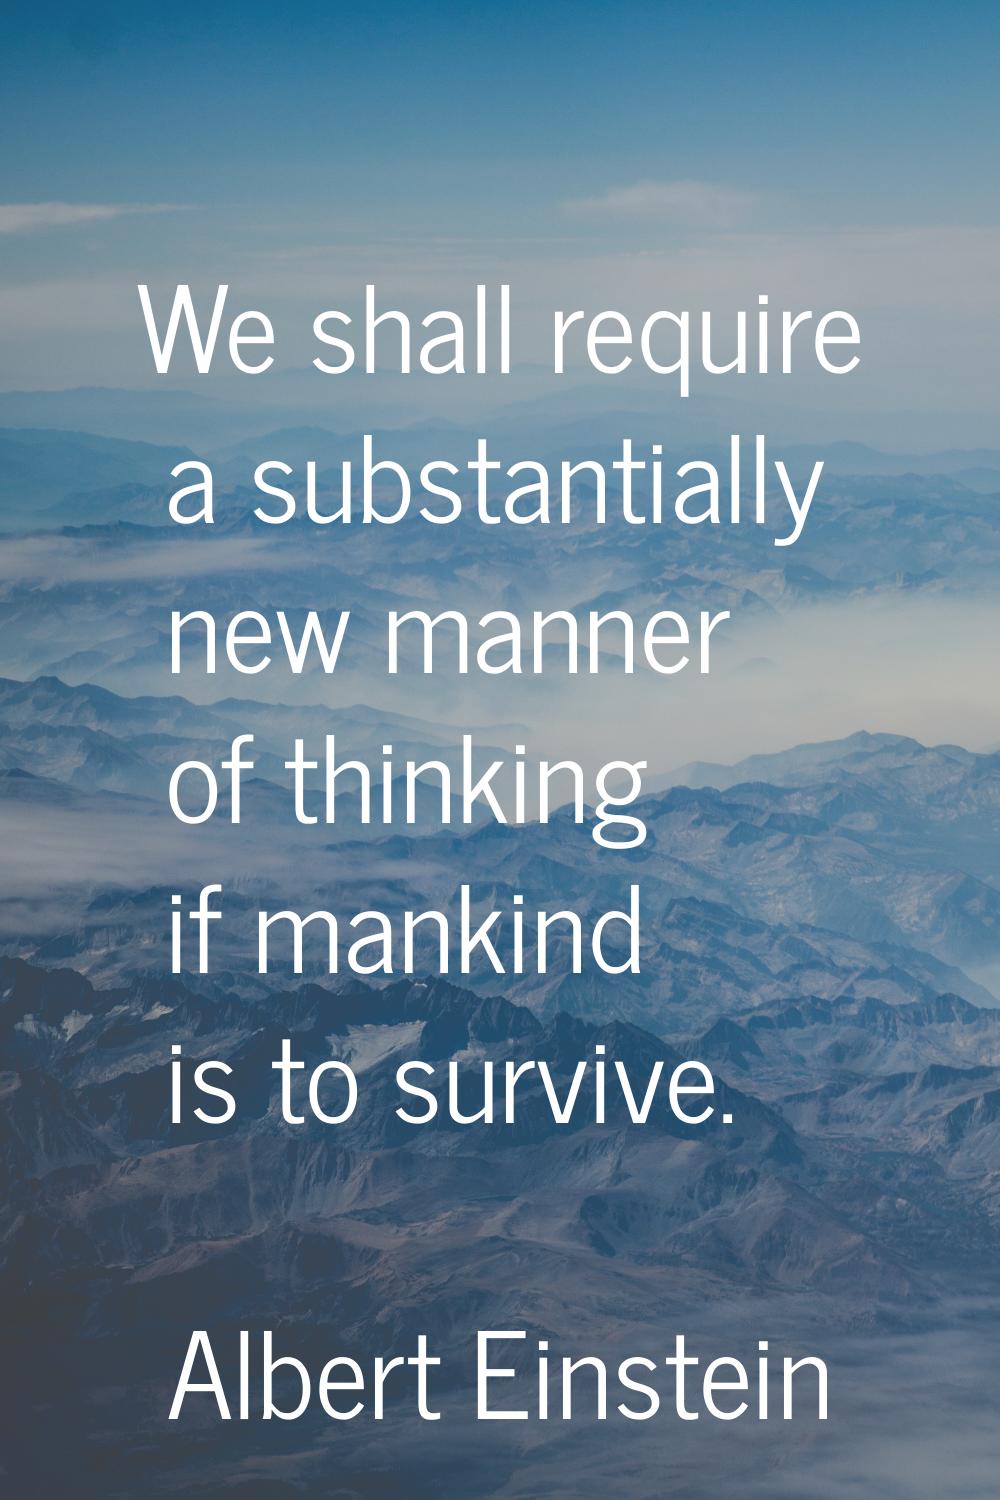 We shall require a substantially new manner of thinking if mankind is to survive.